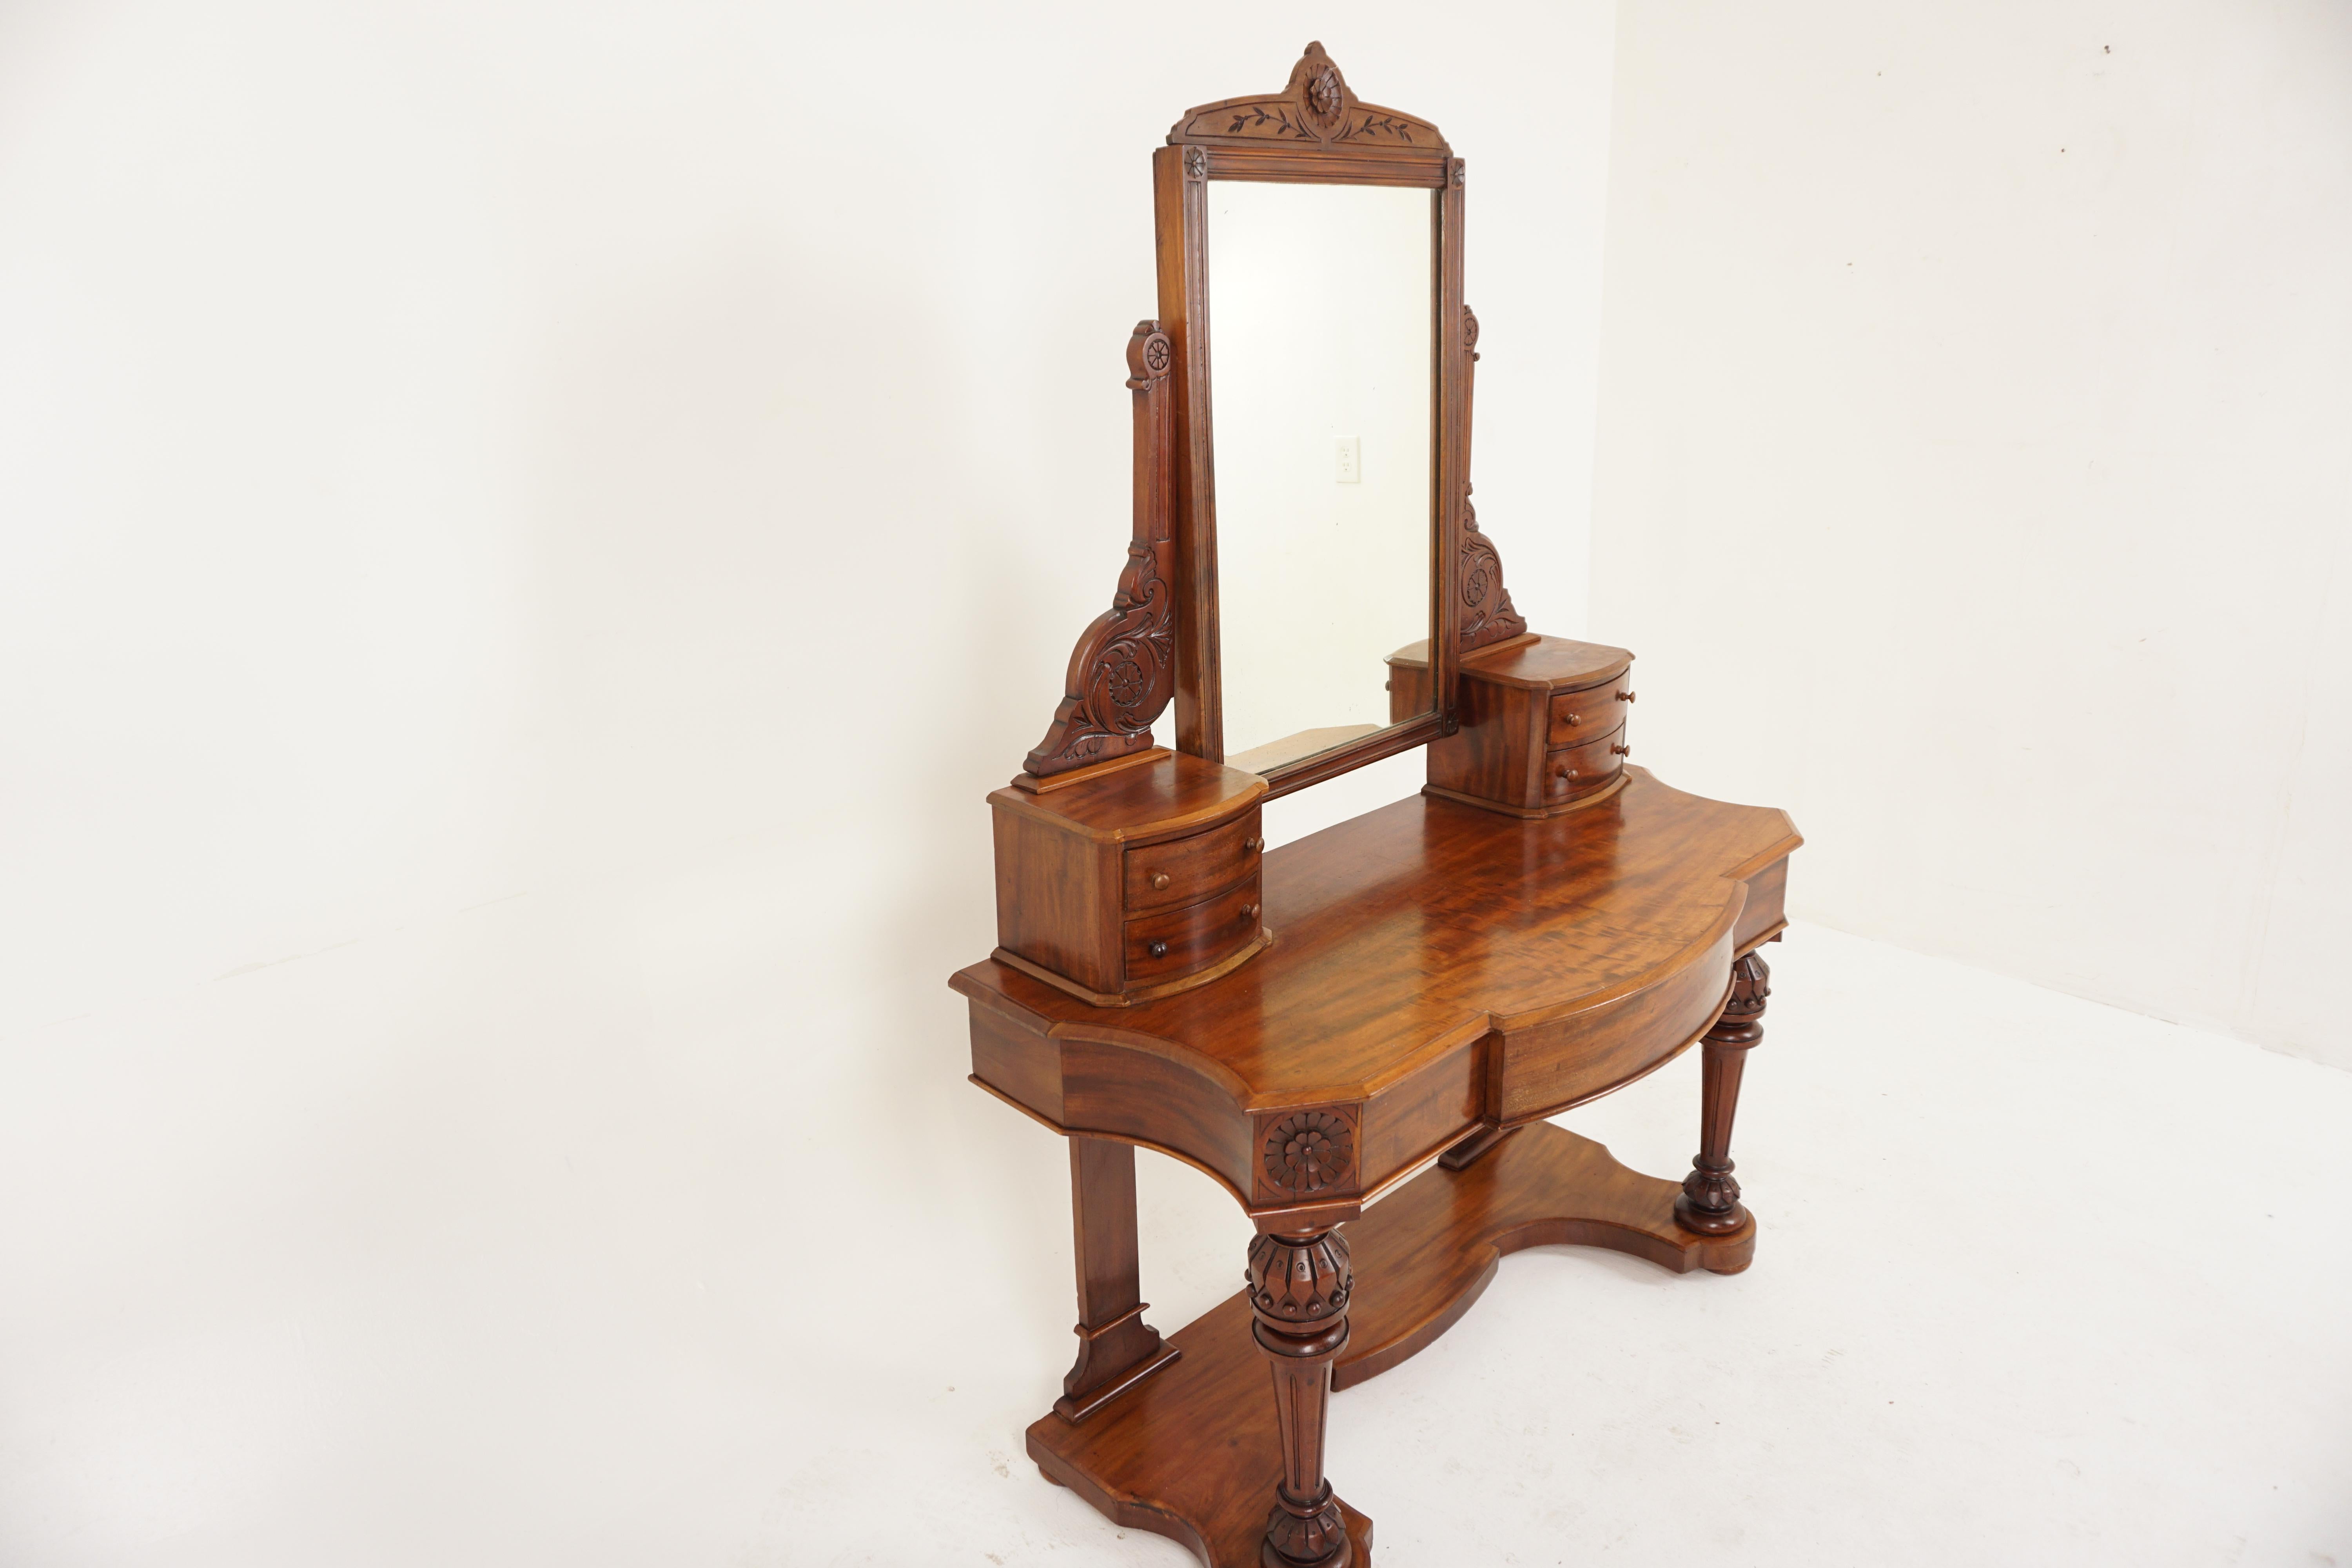 Antique Victorian walnut Duhess dressing table vanity, Scotland 1870, H701.

Scotland 1870
Solid Walnut + Veneer
Original Finish
With original Carved Framed Mirror
Four dovetailed bow front drawers
Serpentine top with single bow front